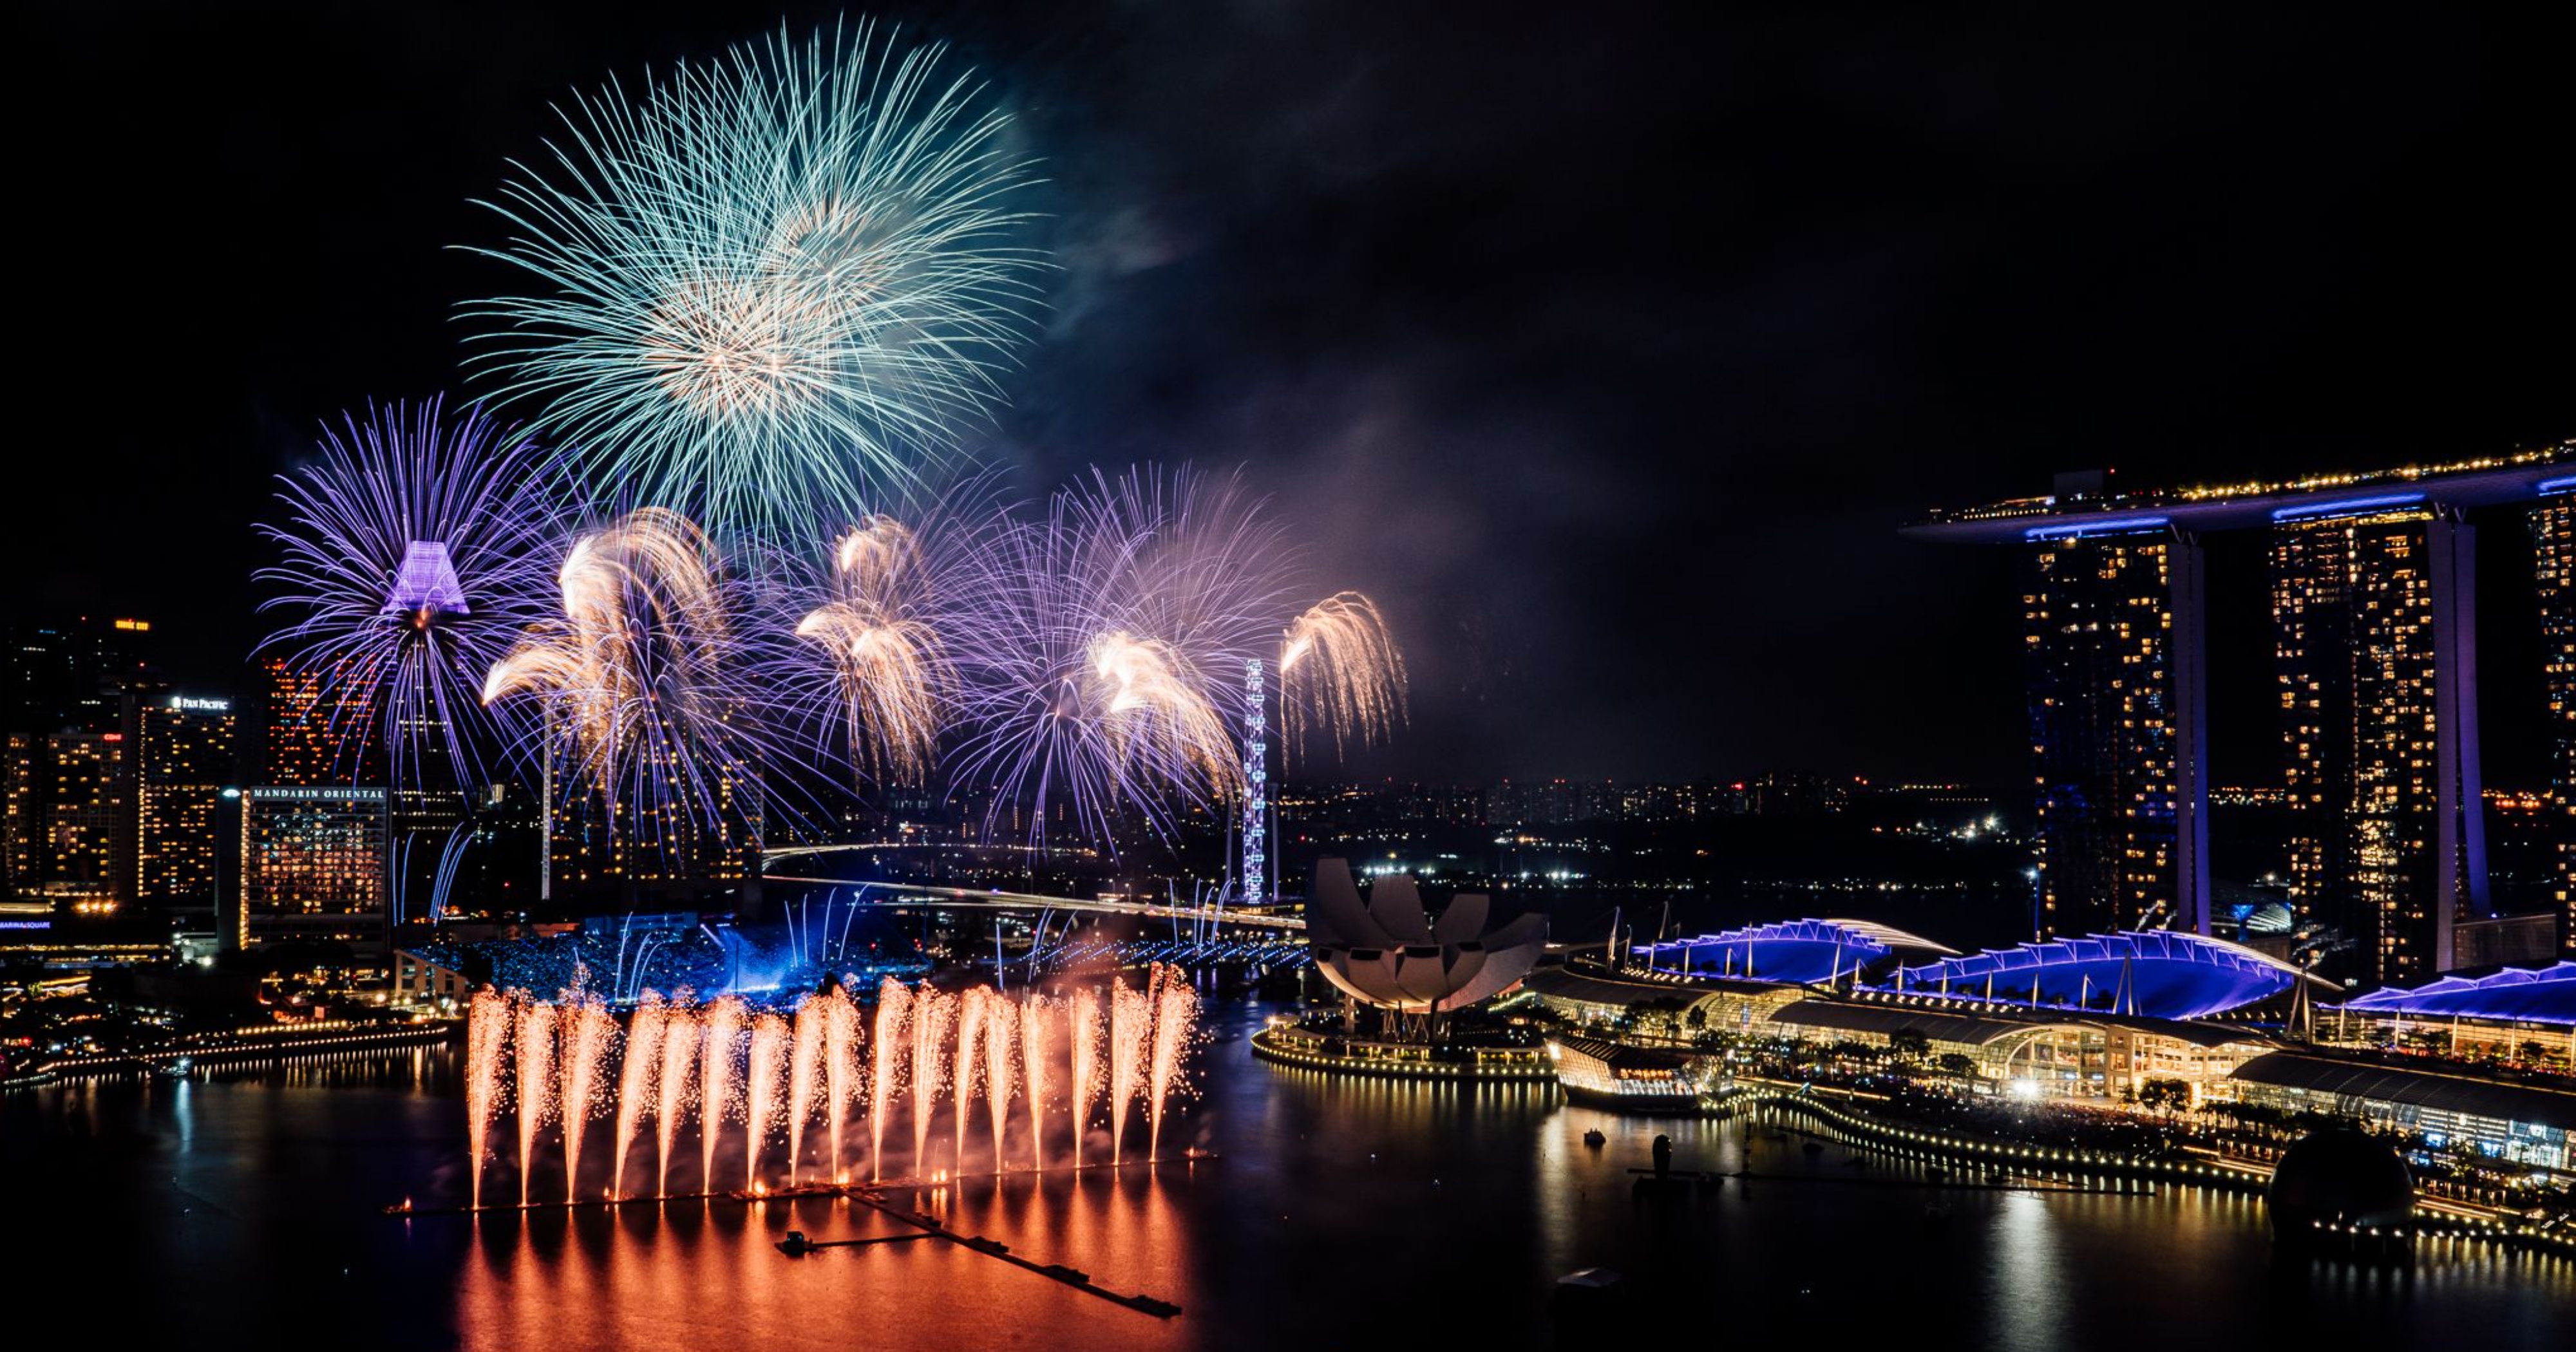 New year countdown fireworks returning to Marina Bay for the first time since pandemic